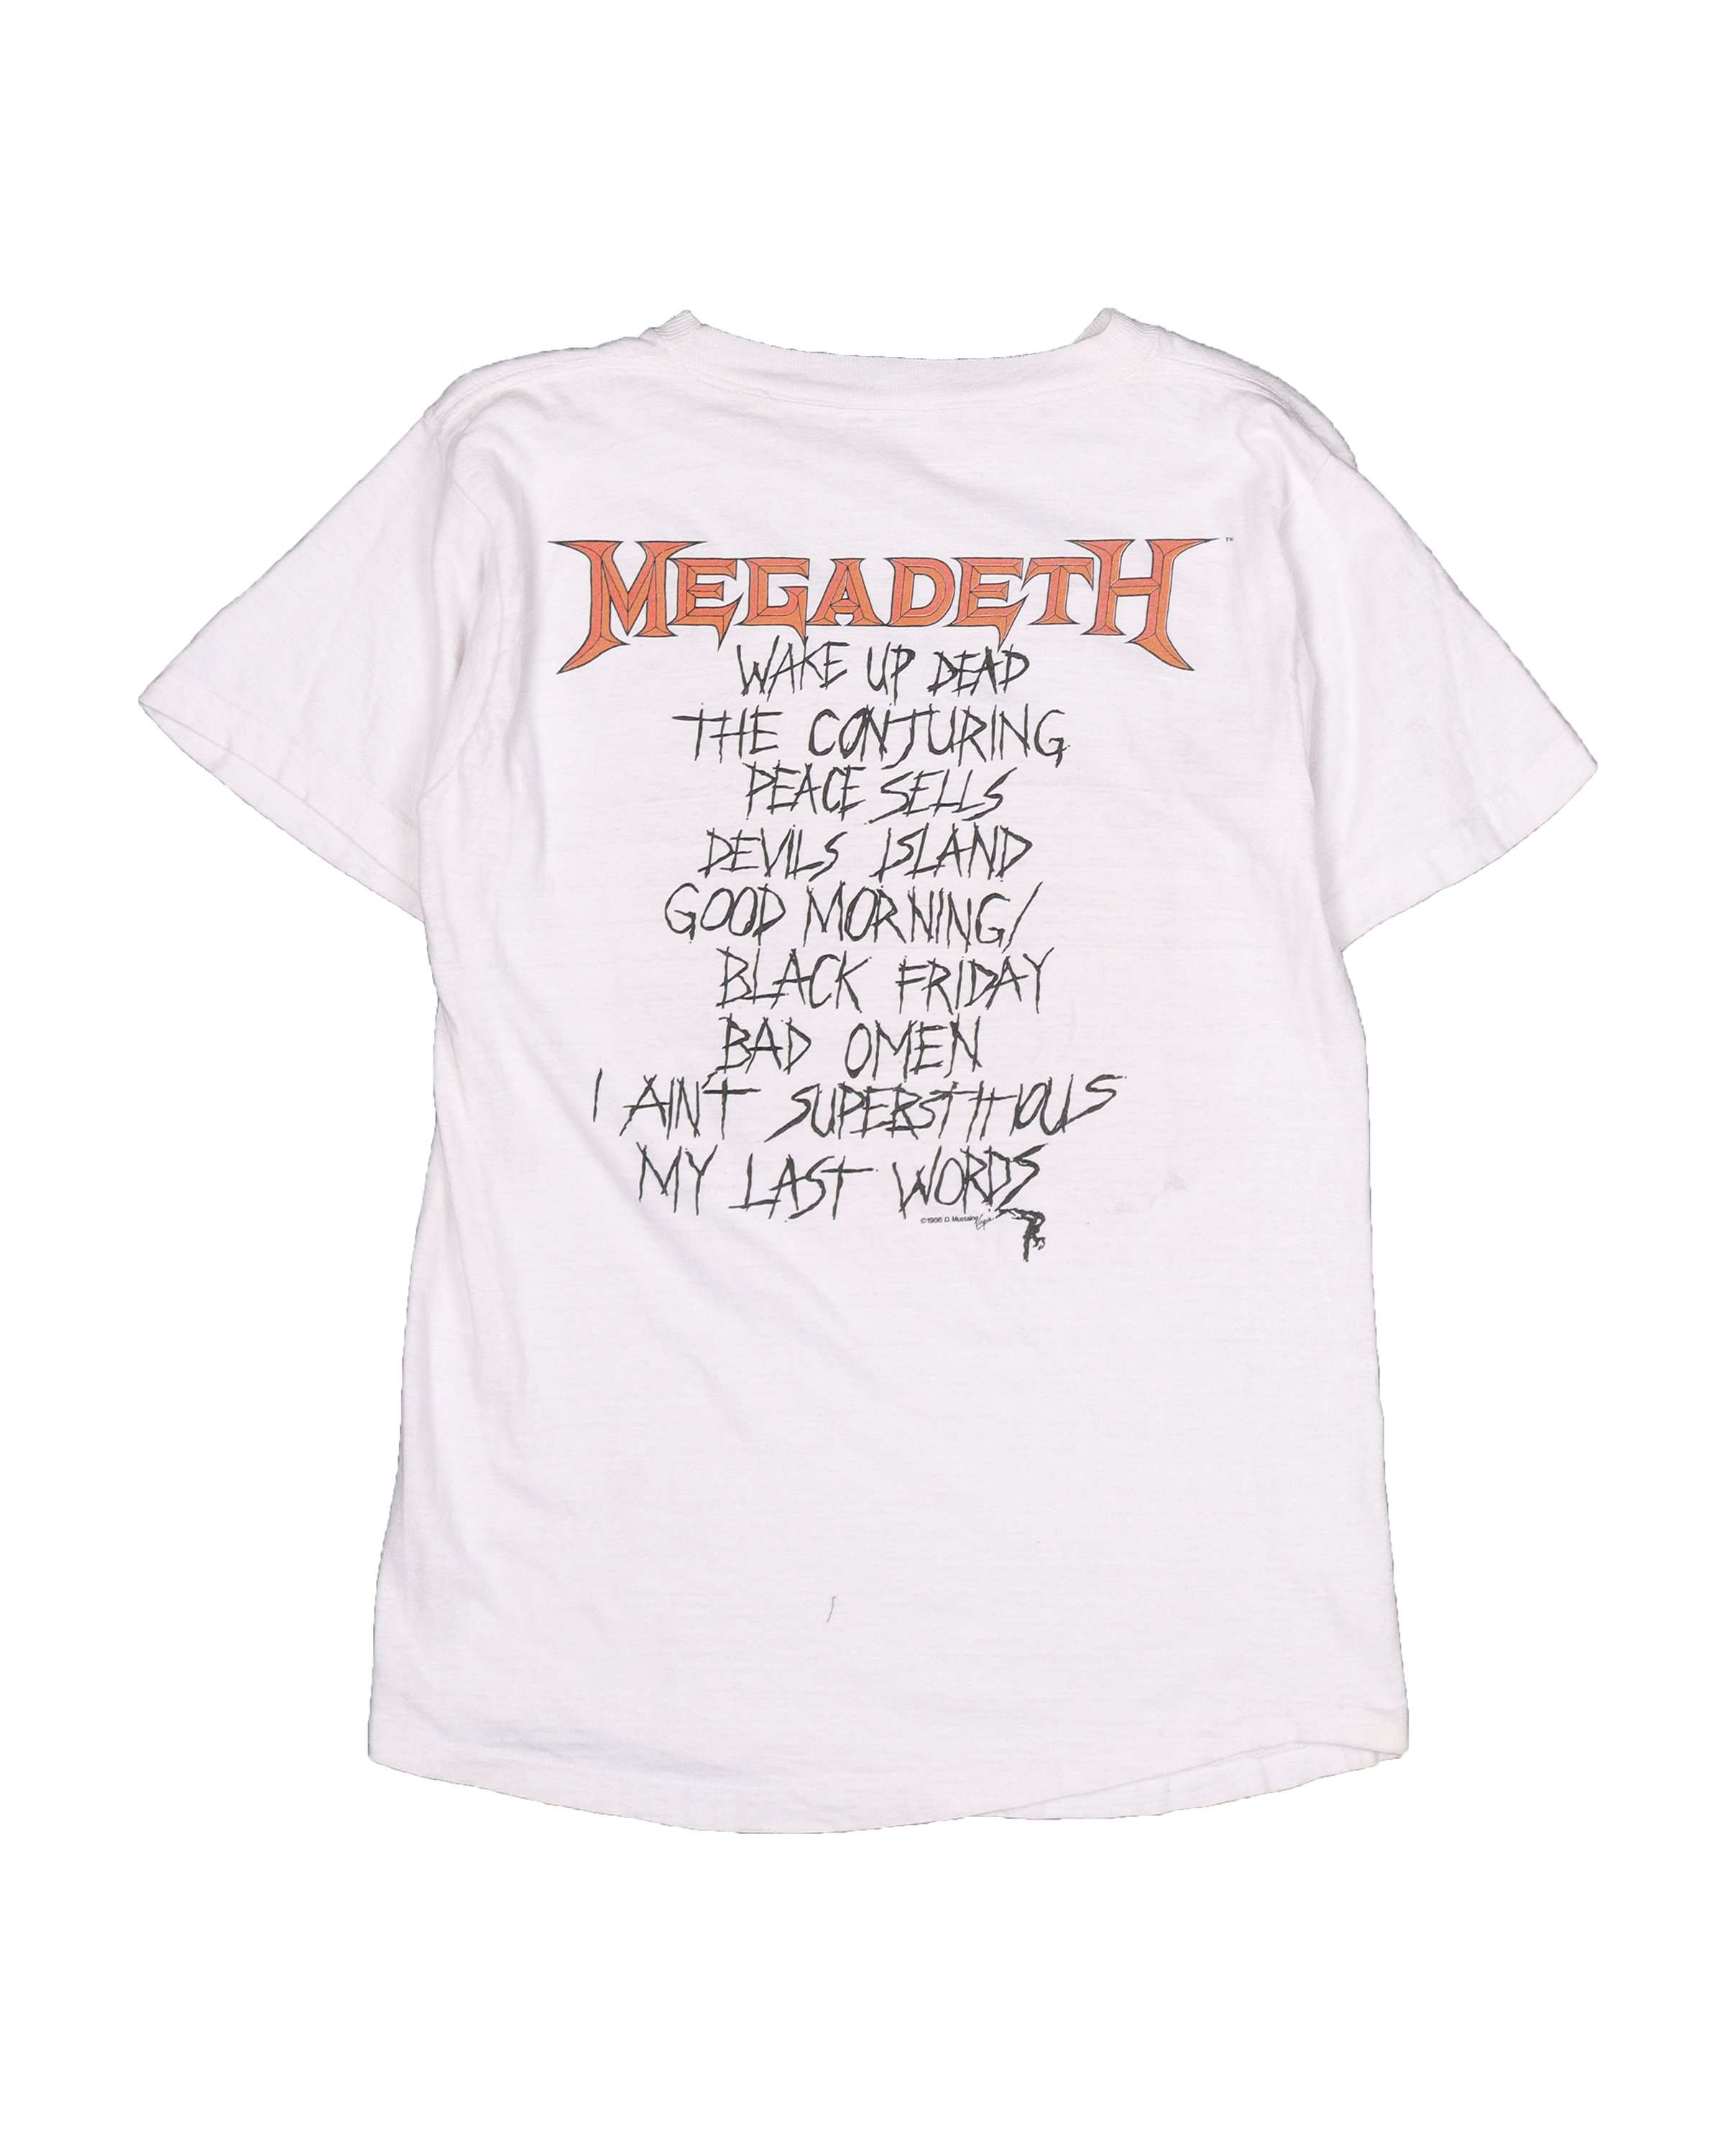 Megadeth "Peace Sells But Who's Buying?" T-Shirt